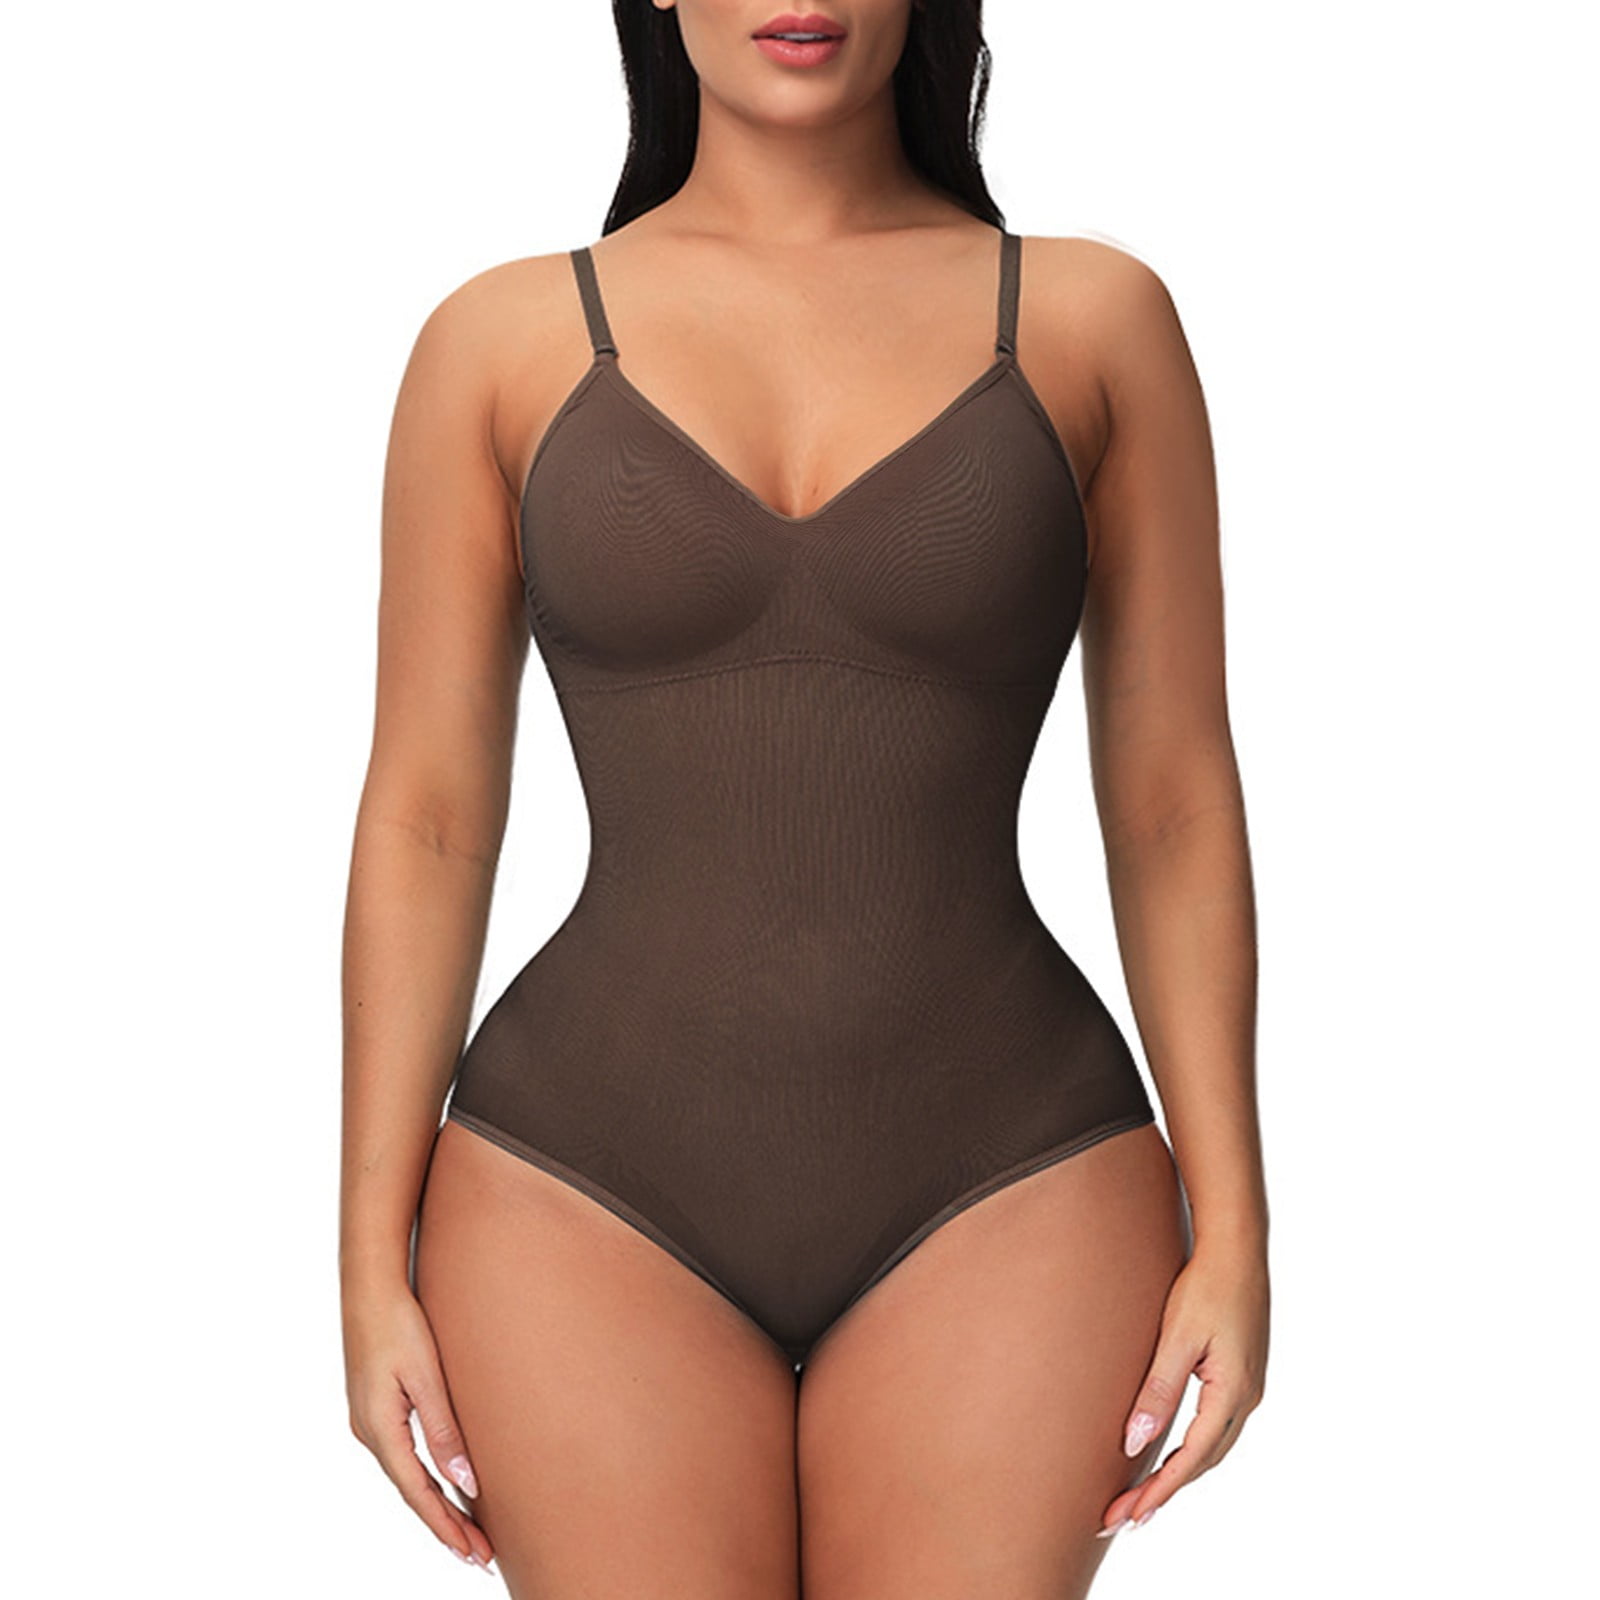 SO Brand Black Bodysuit With Built-In Bra Pads Thong Style Size XL